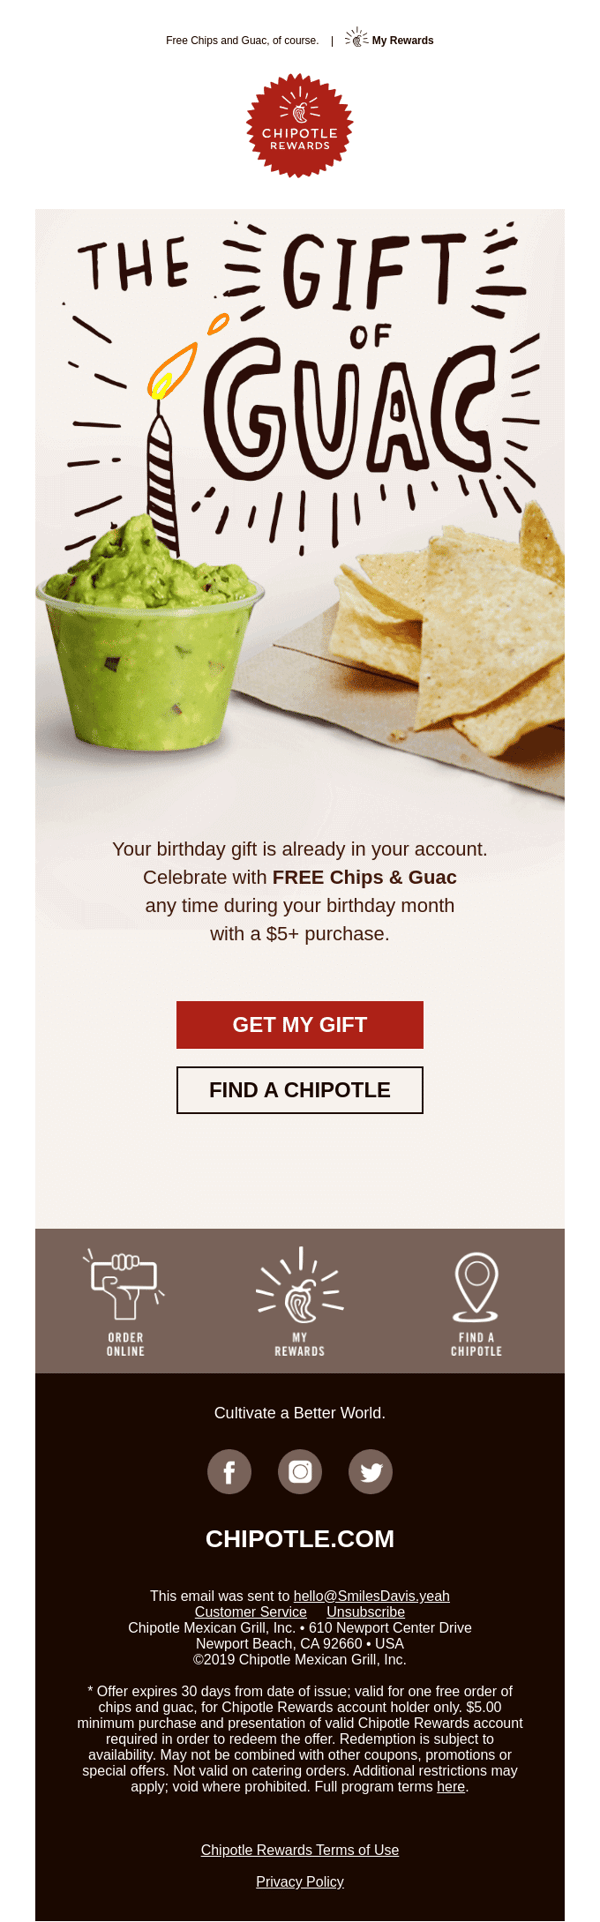 Chipotle-birthday-email